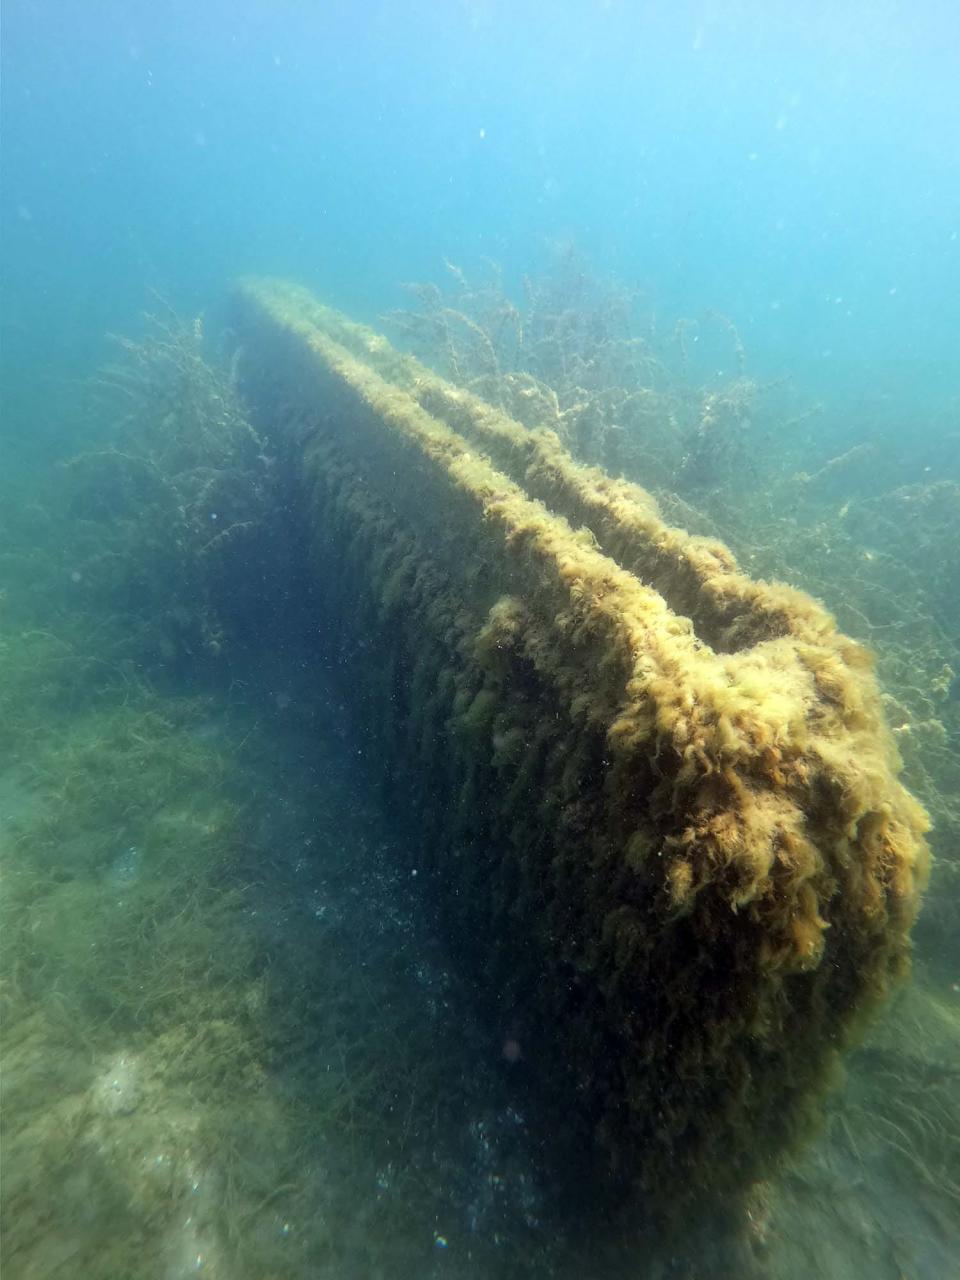 The remains of the Boaz, a 19th-century double-centerboard lumber schooner that sank in Door County's North Bay in 1900, was placed on the National Register of Historic Places, about four months after it was named to the Wisconsin State Register of Historic Places.